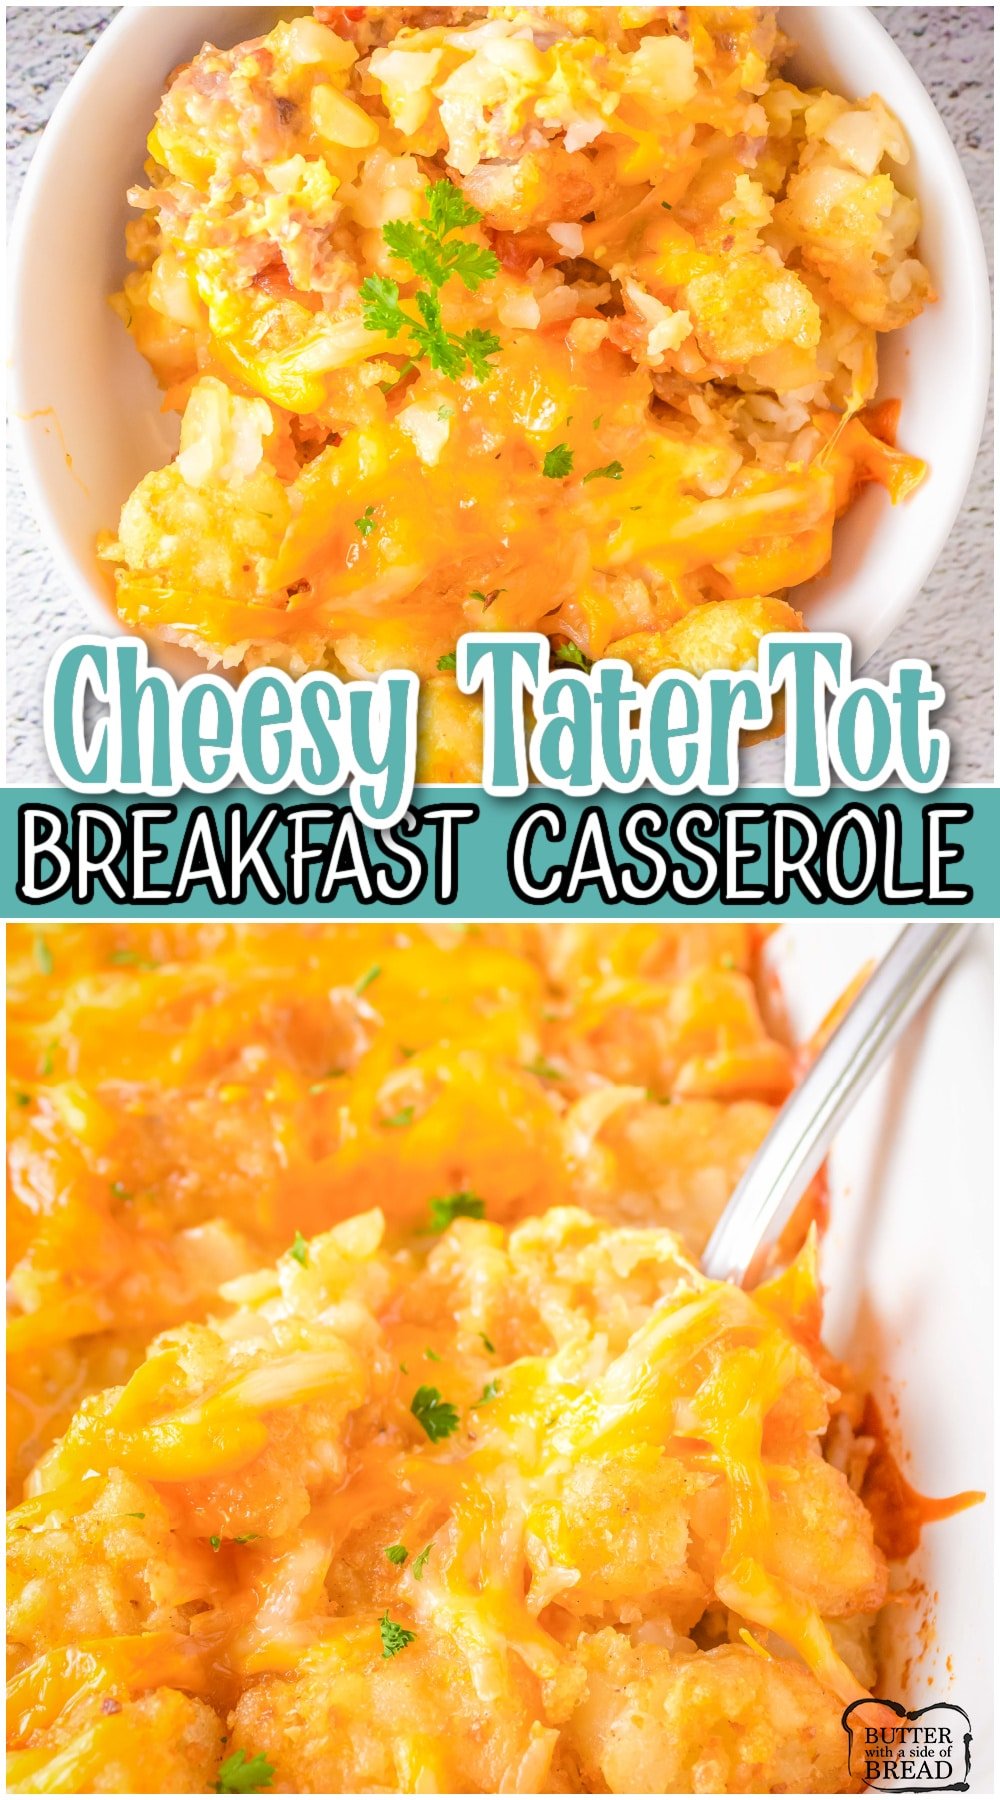 Tater Tot Breakfast Casserole with Sausage is packed with all your morning favorites: hash brown-like tater tots, savory sausage, gooey cheese, eggs, peppers, & bacon!  Easy, hearty breakfast casserole that everyone loves!